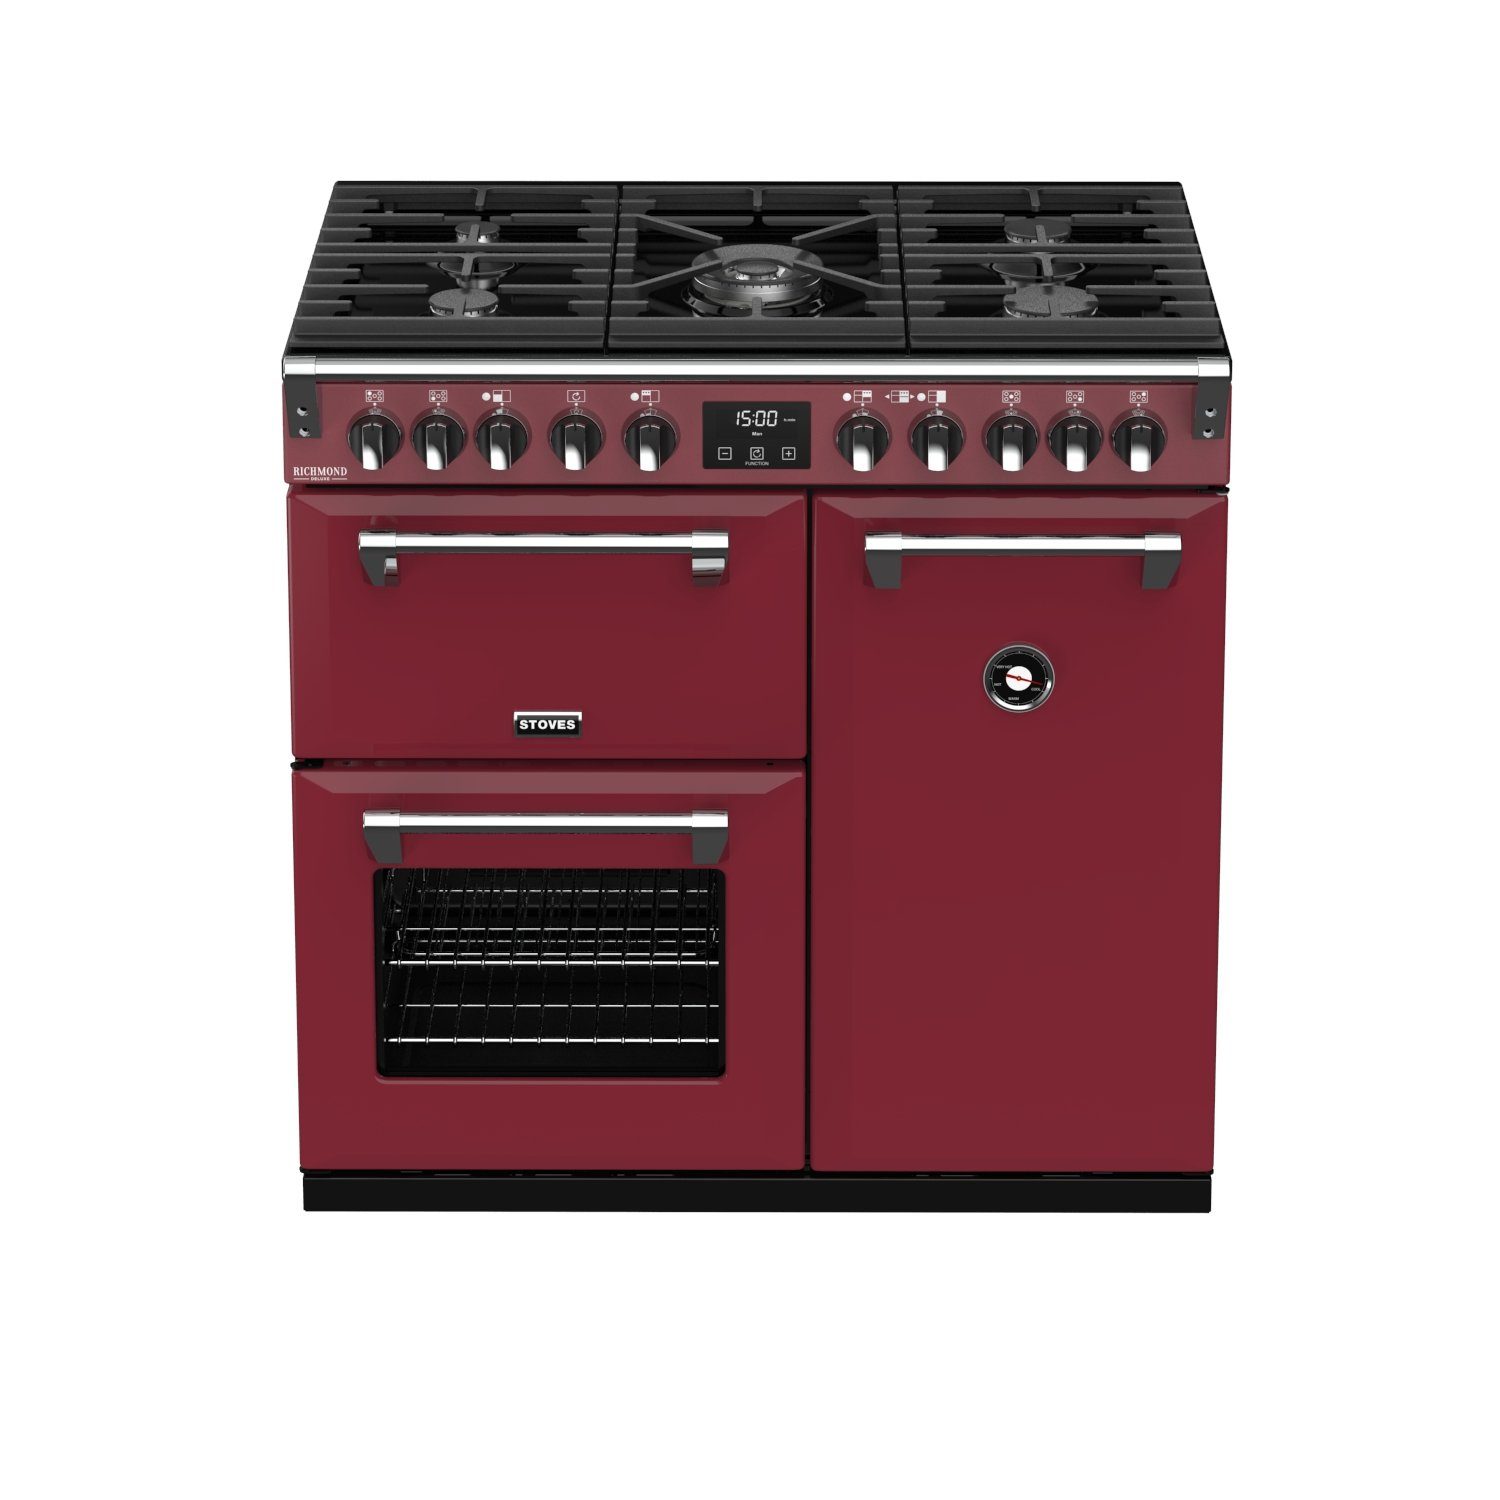 GAS Red/Chrom DF Gas-Standherd Chili STOVES RICHMOND S900 Deluxe CB STOVES